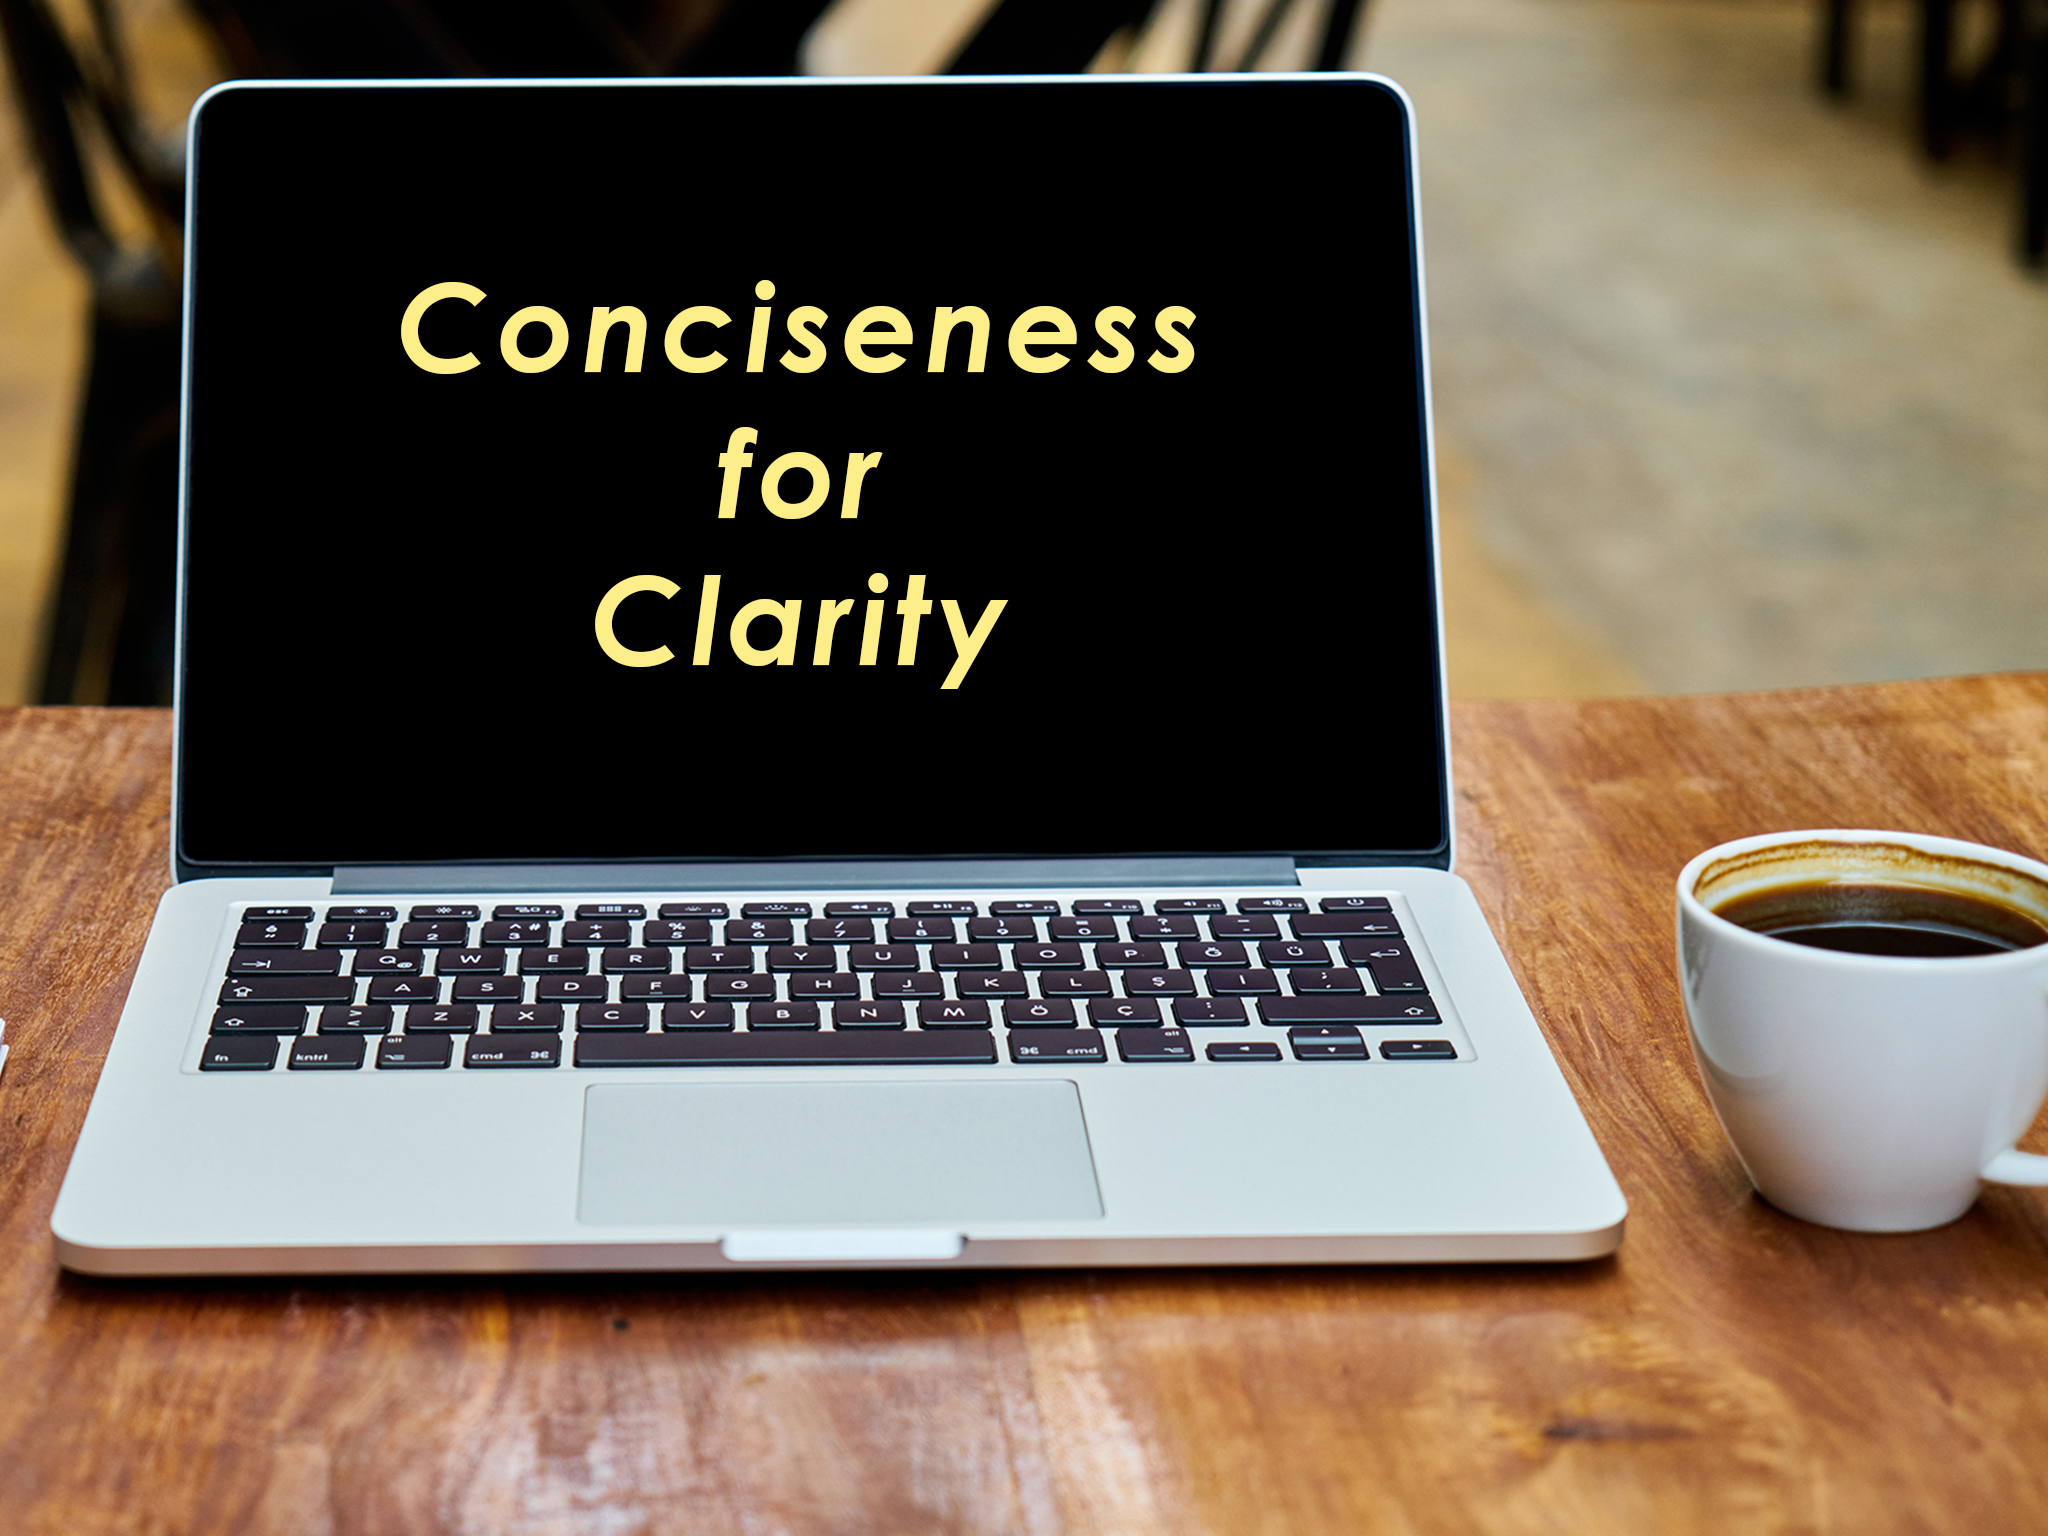 Computer with text "Conciseness for Clarity"